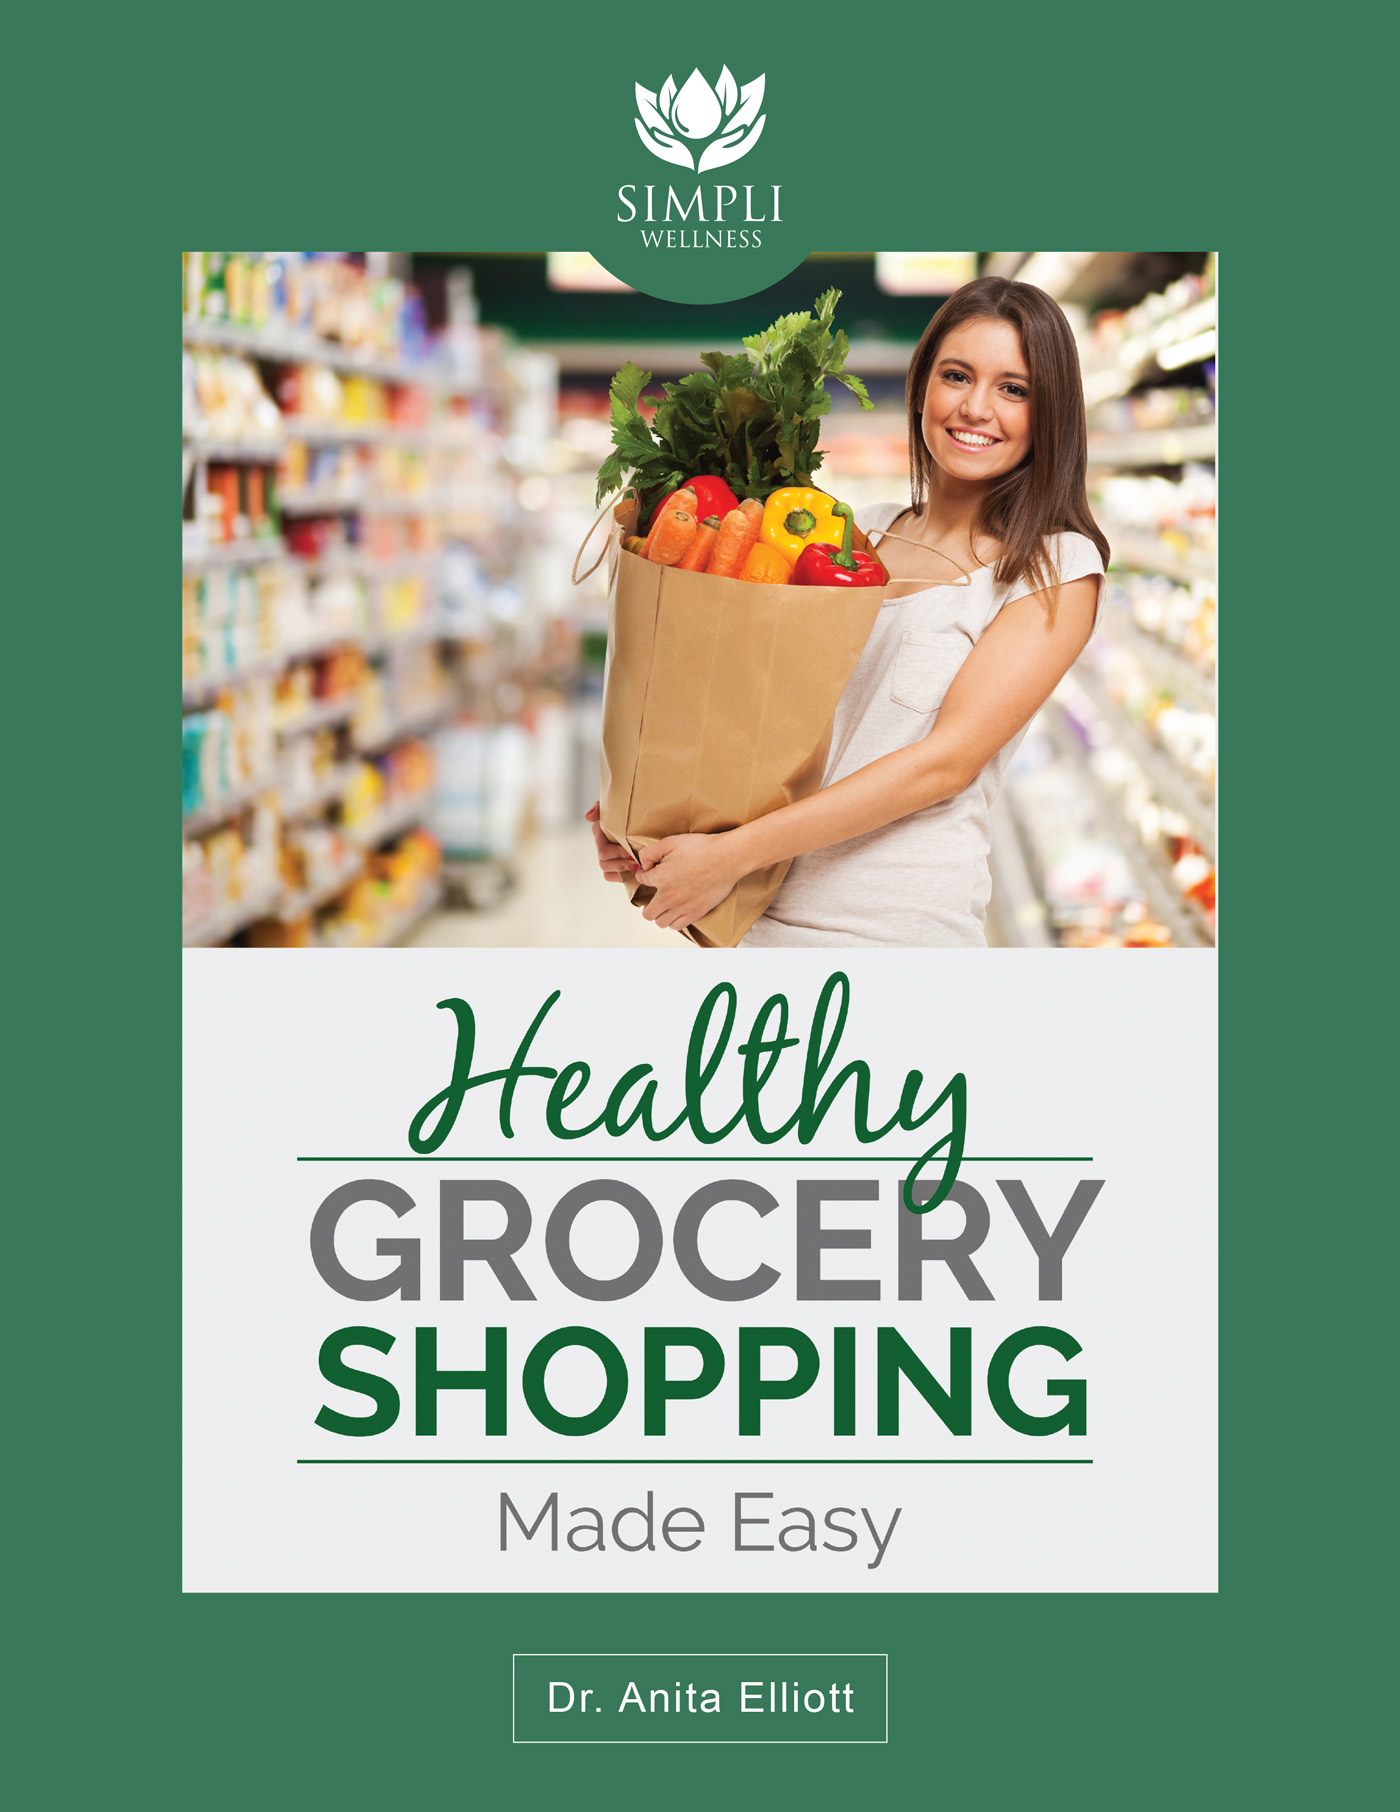 SW_Healthy_Grocery_Shopping_Made_Easy-1